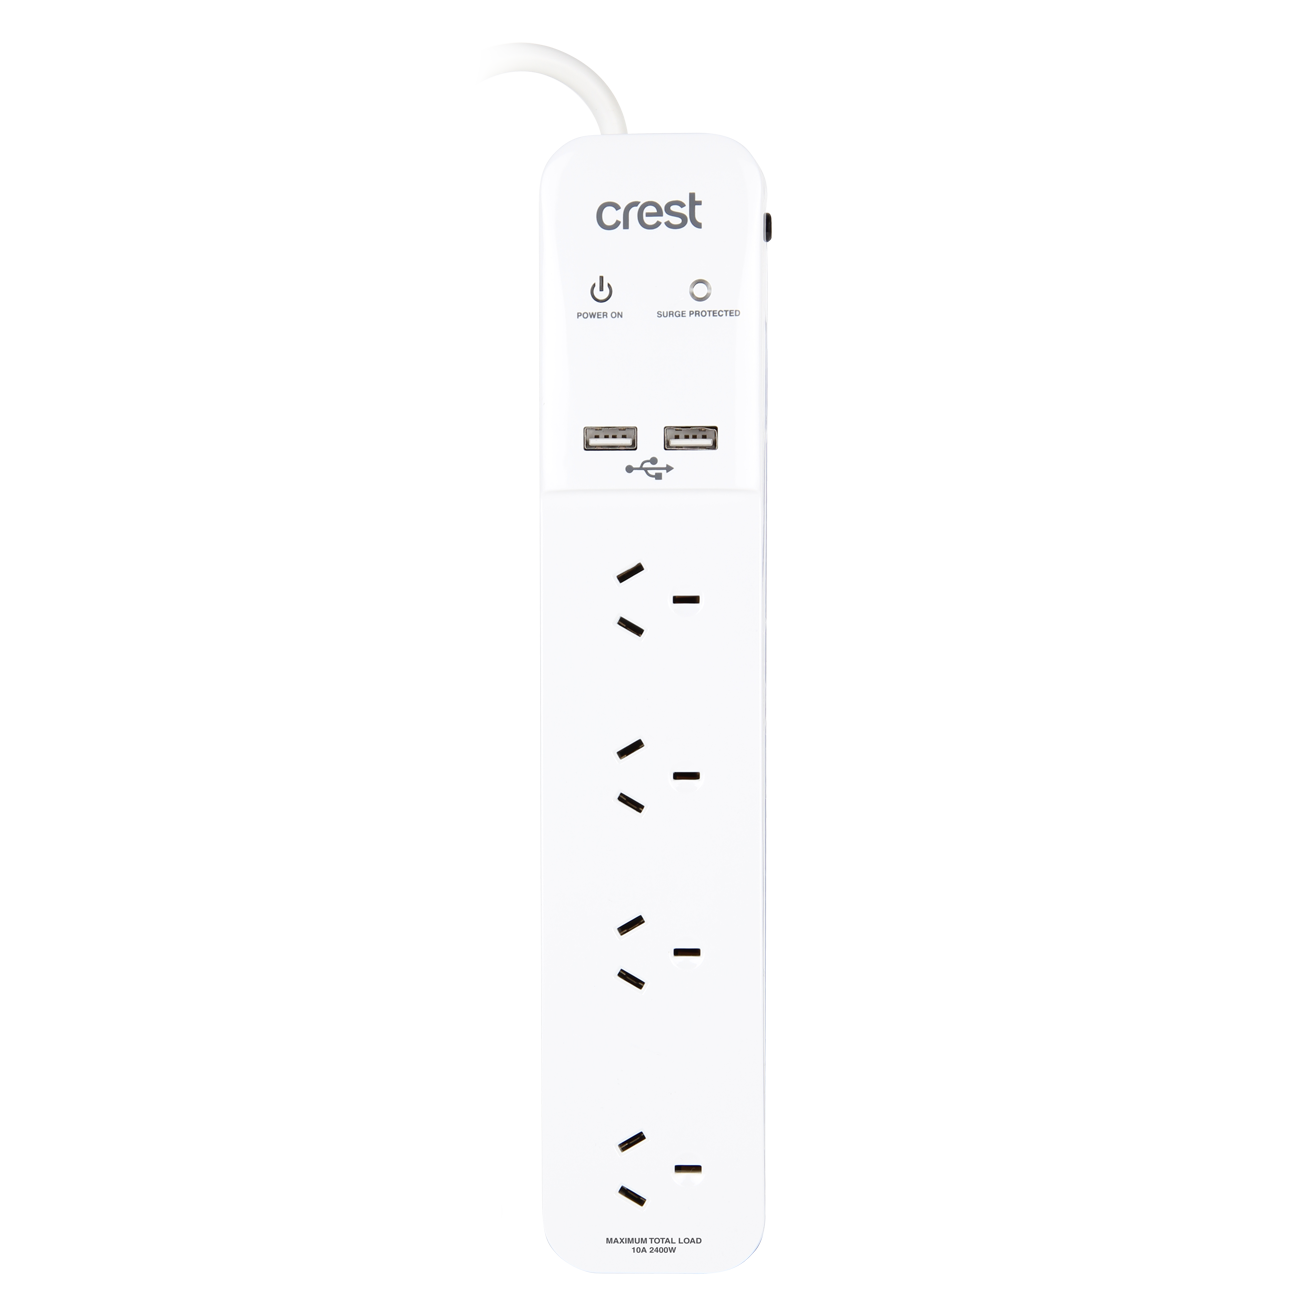 Power Board 4 Sockets with 2 USB Ports & Surge Protection